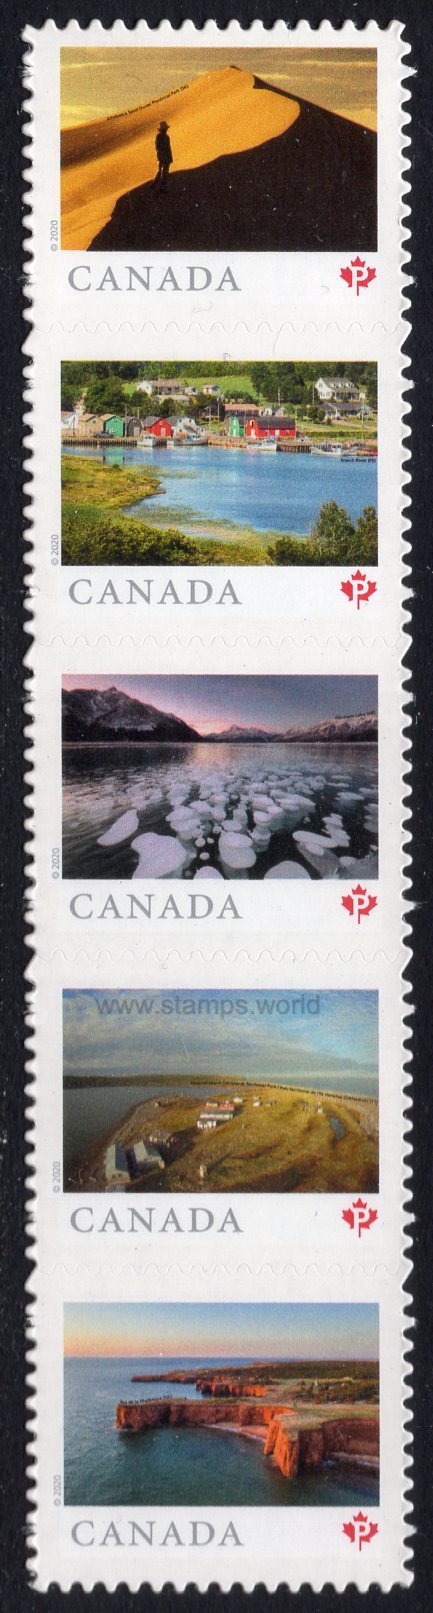 Canada. 2020 From Far and Wide. MNH